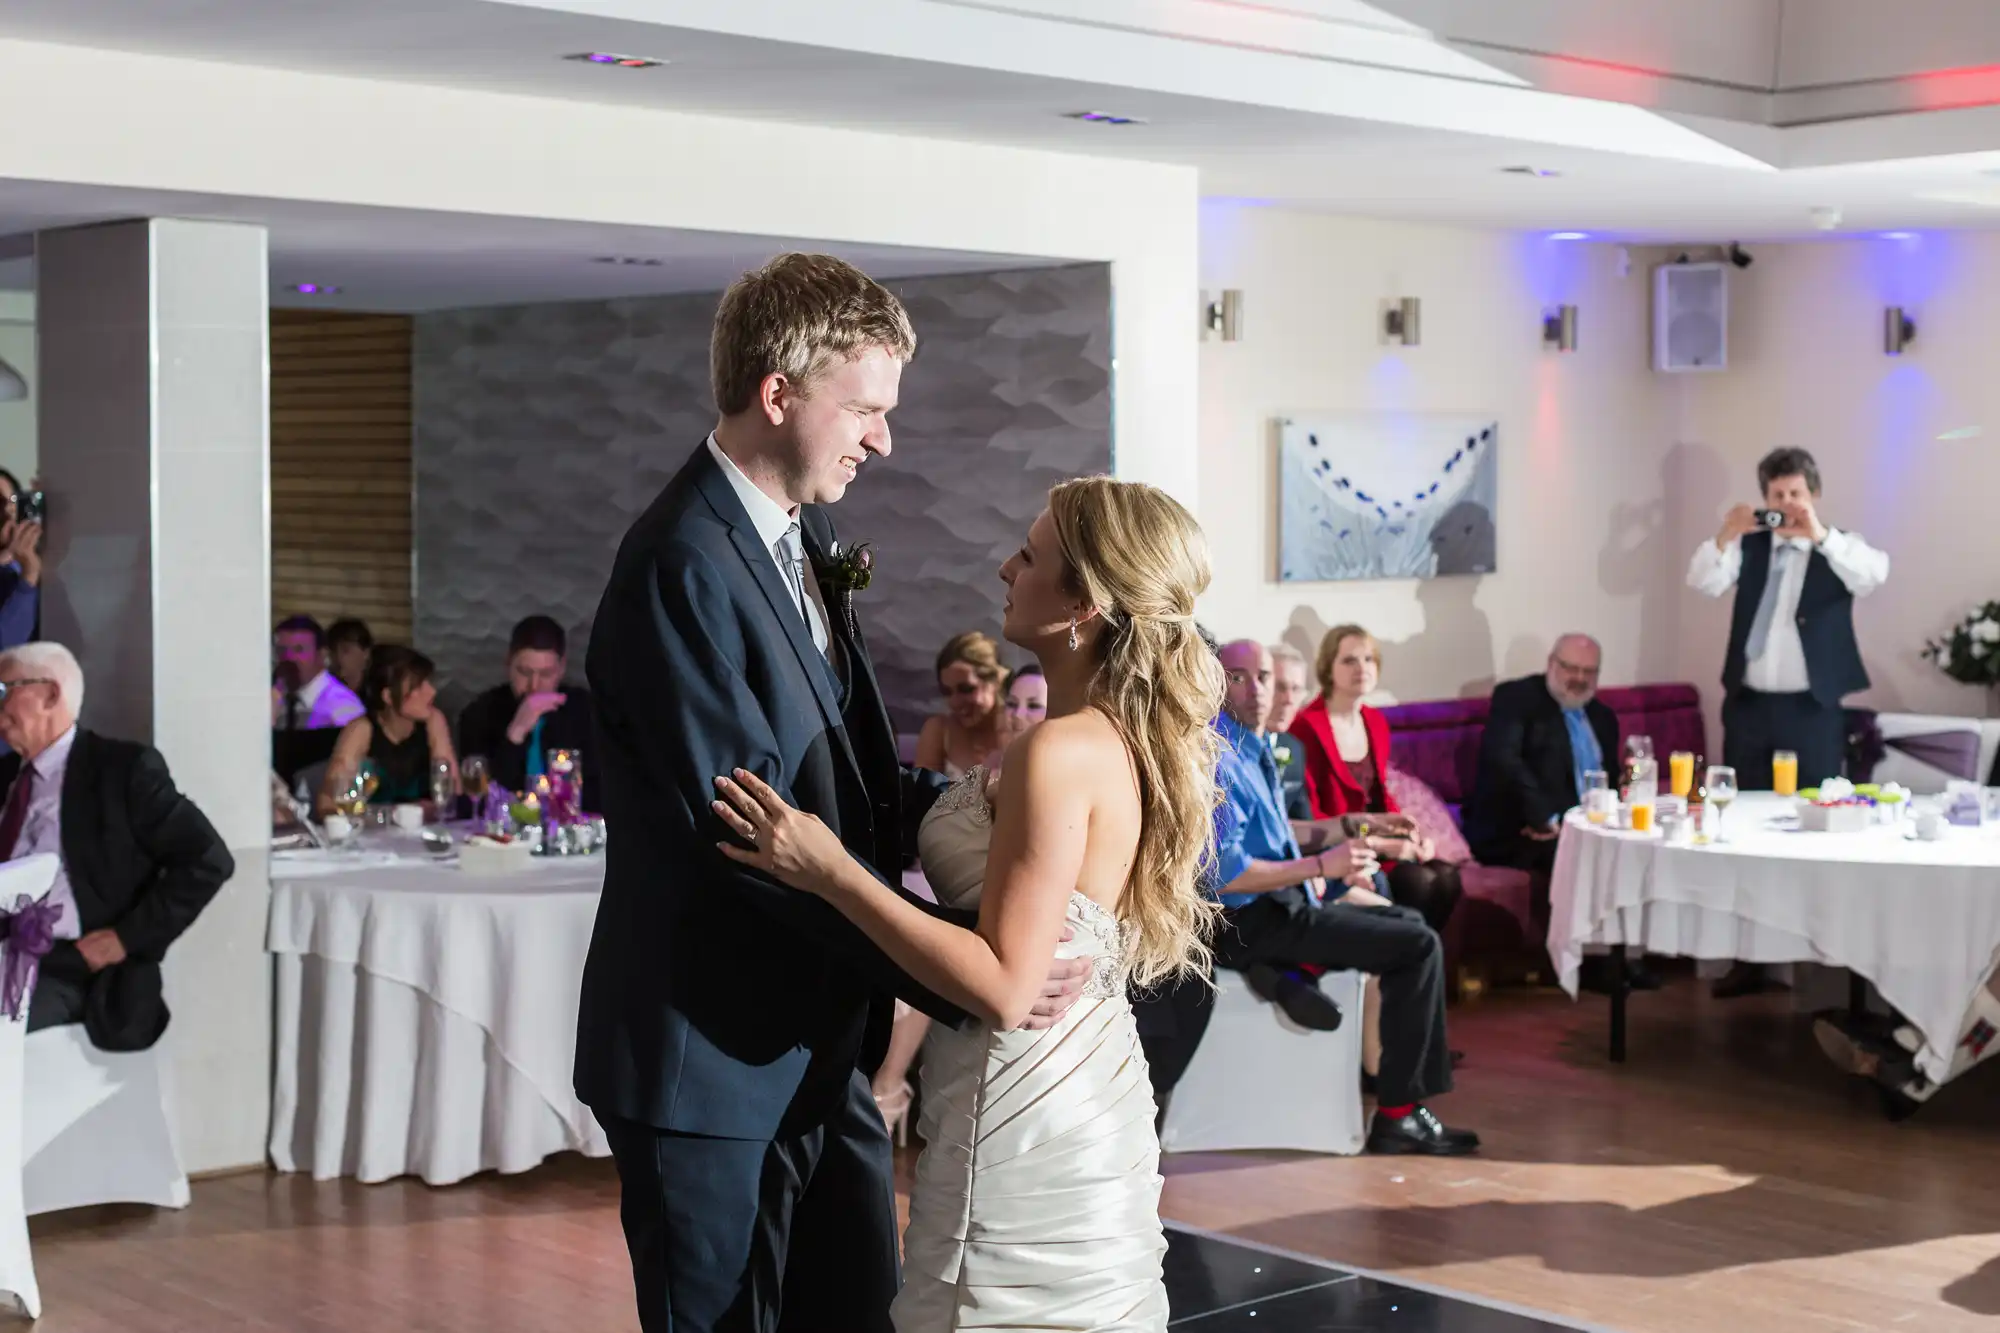 A newlywed couple sharing their first dance in a banquet hall, surrounded by seated guests, with soft lighting and a person capturing the moment.